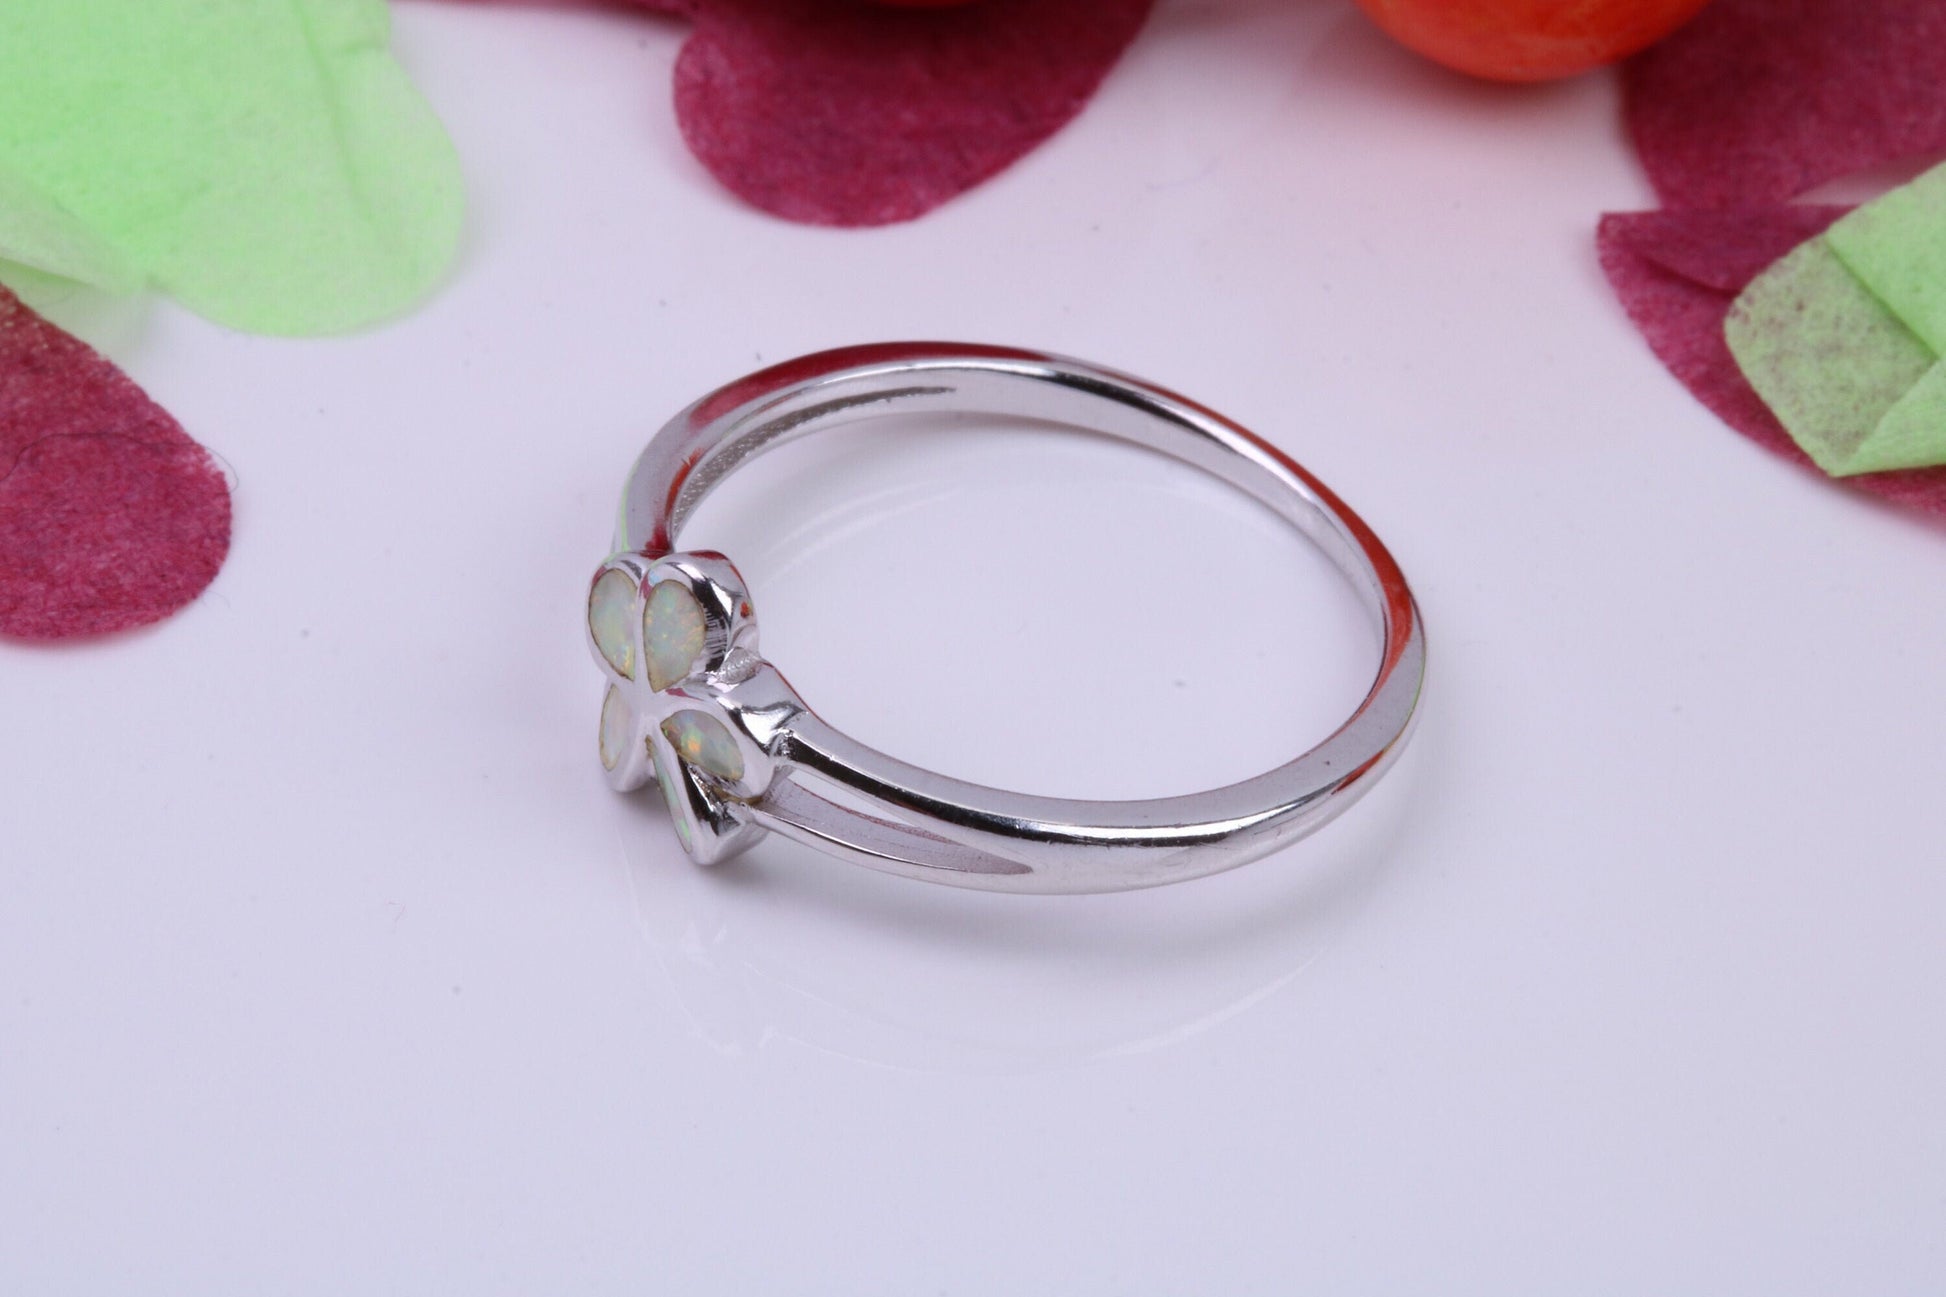 White Opal set Daisy Flower Ring, Made From Solid Sterling Silver